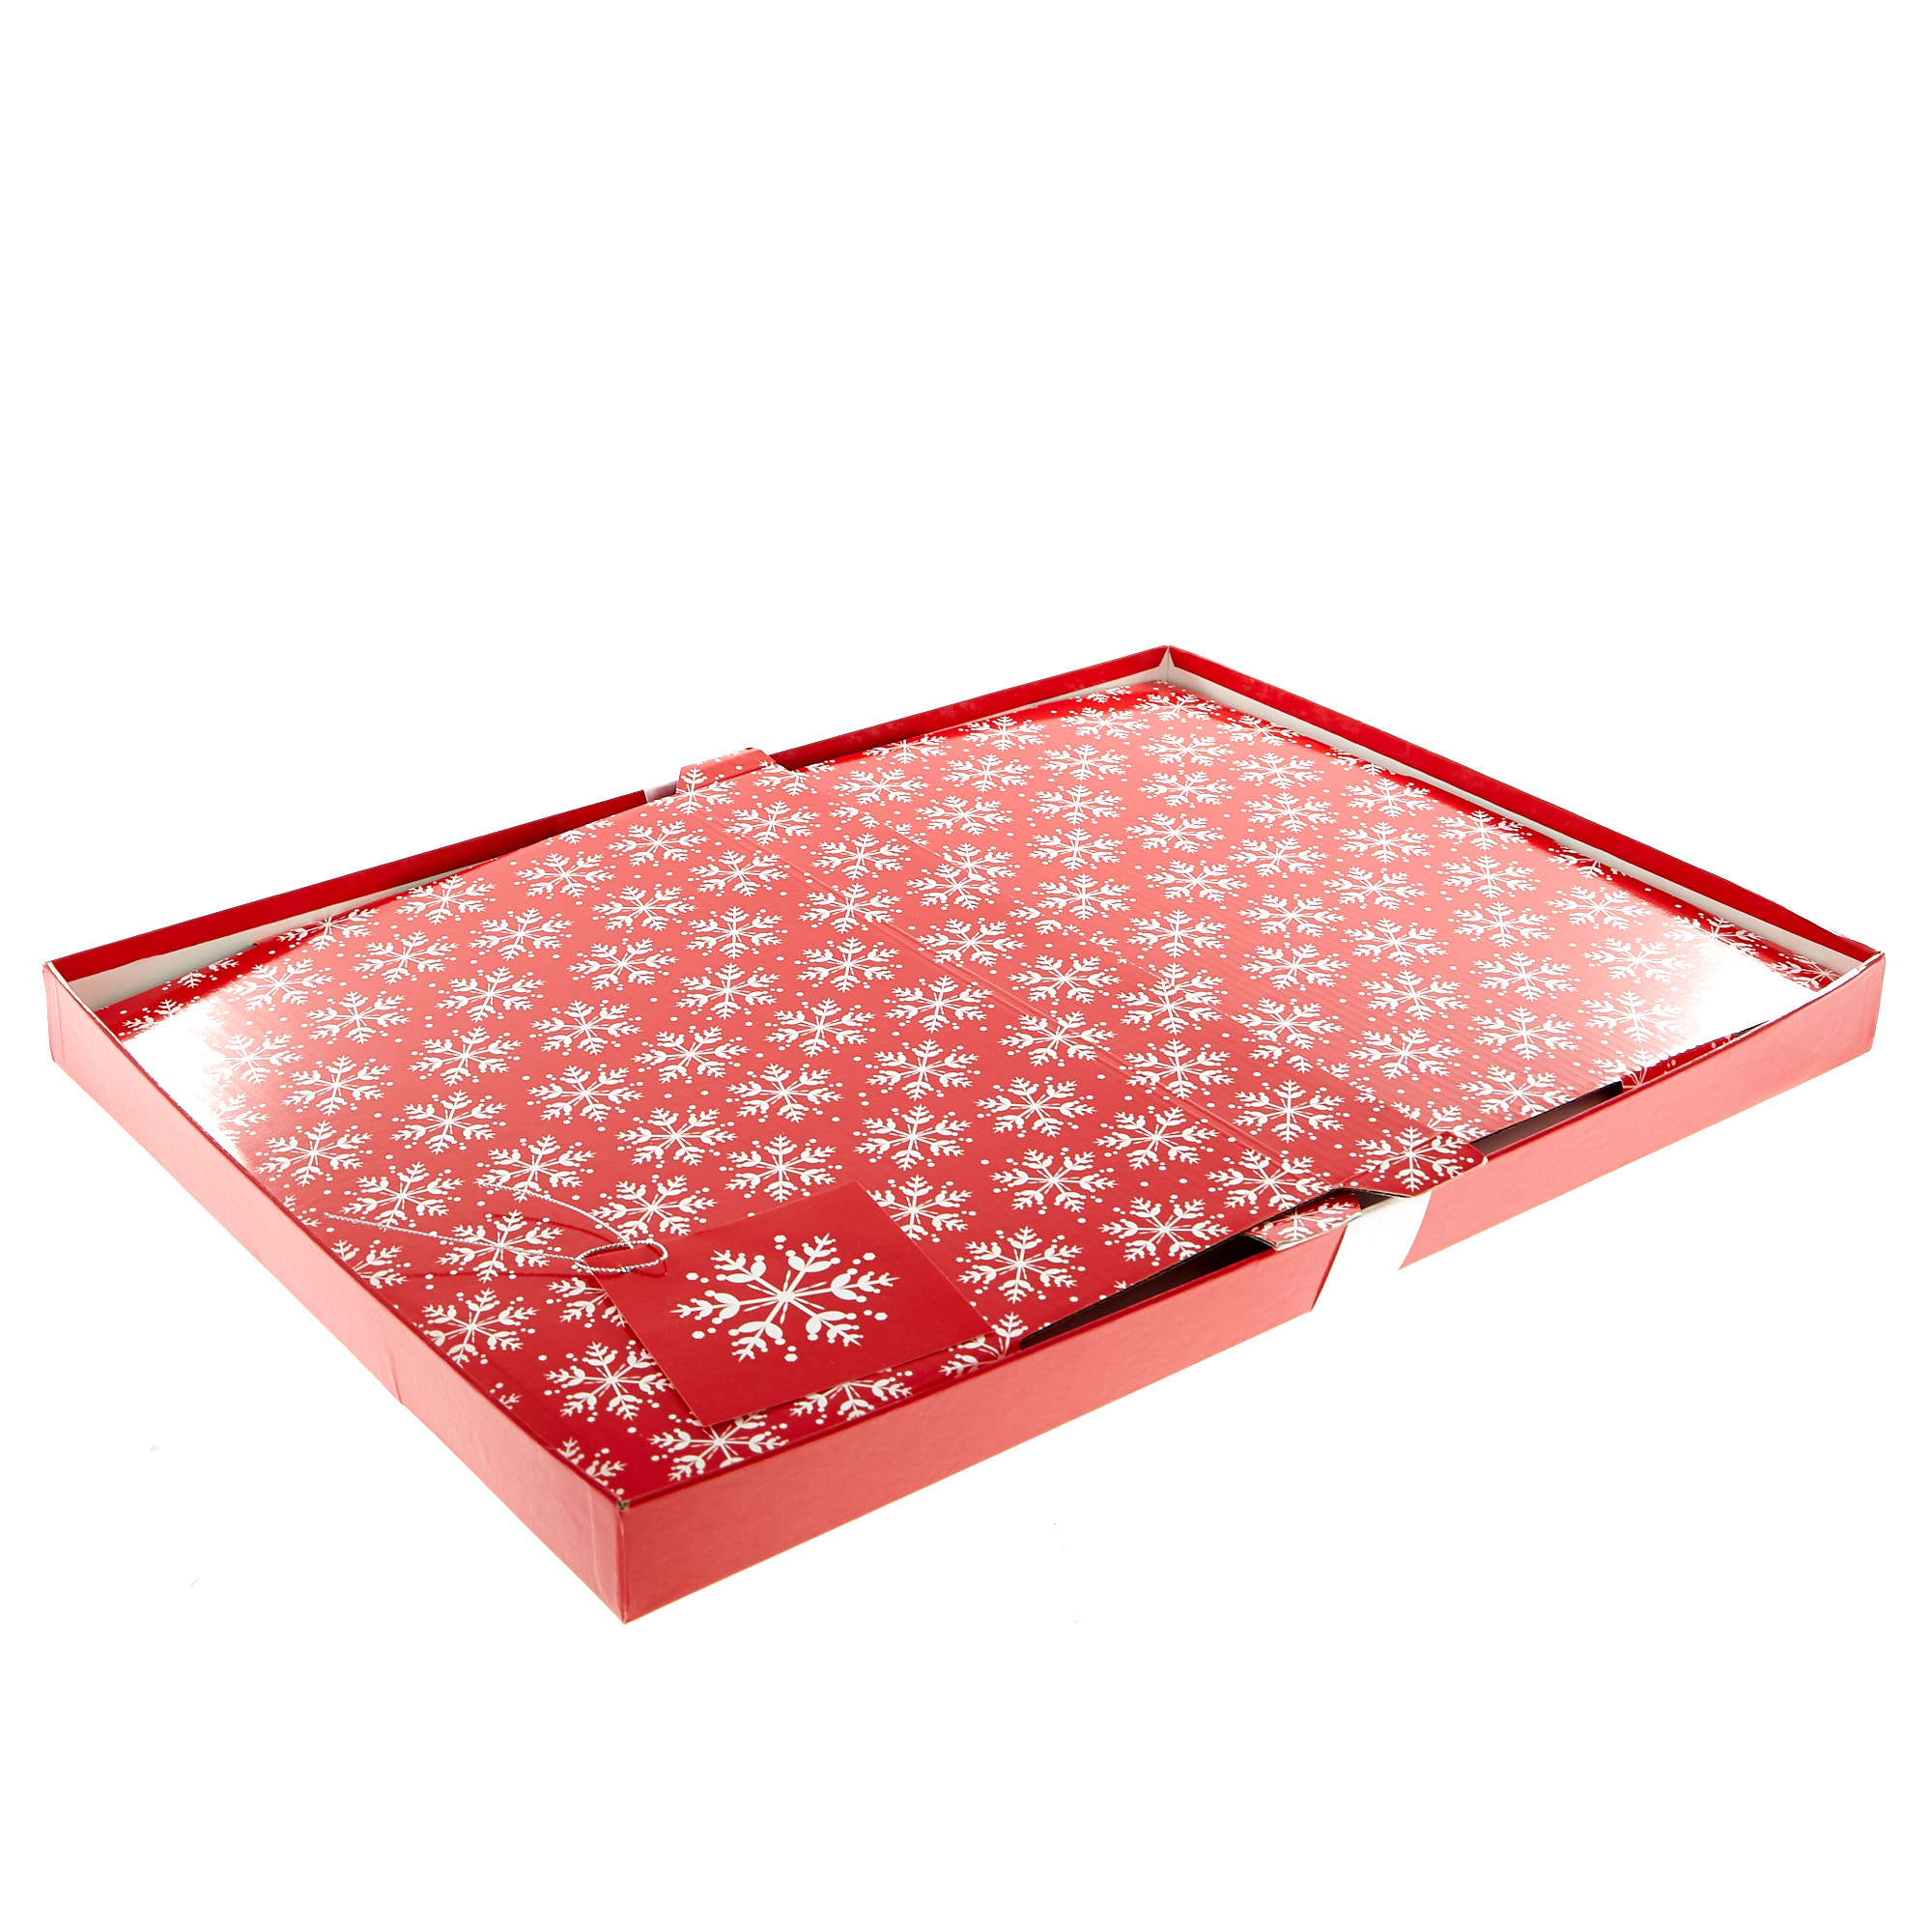 Red & White Snowflakes Flat-Pack Crate Christmas Gift Box